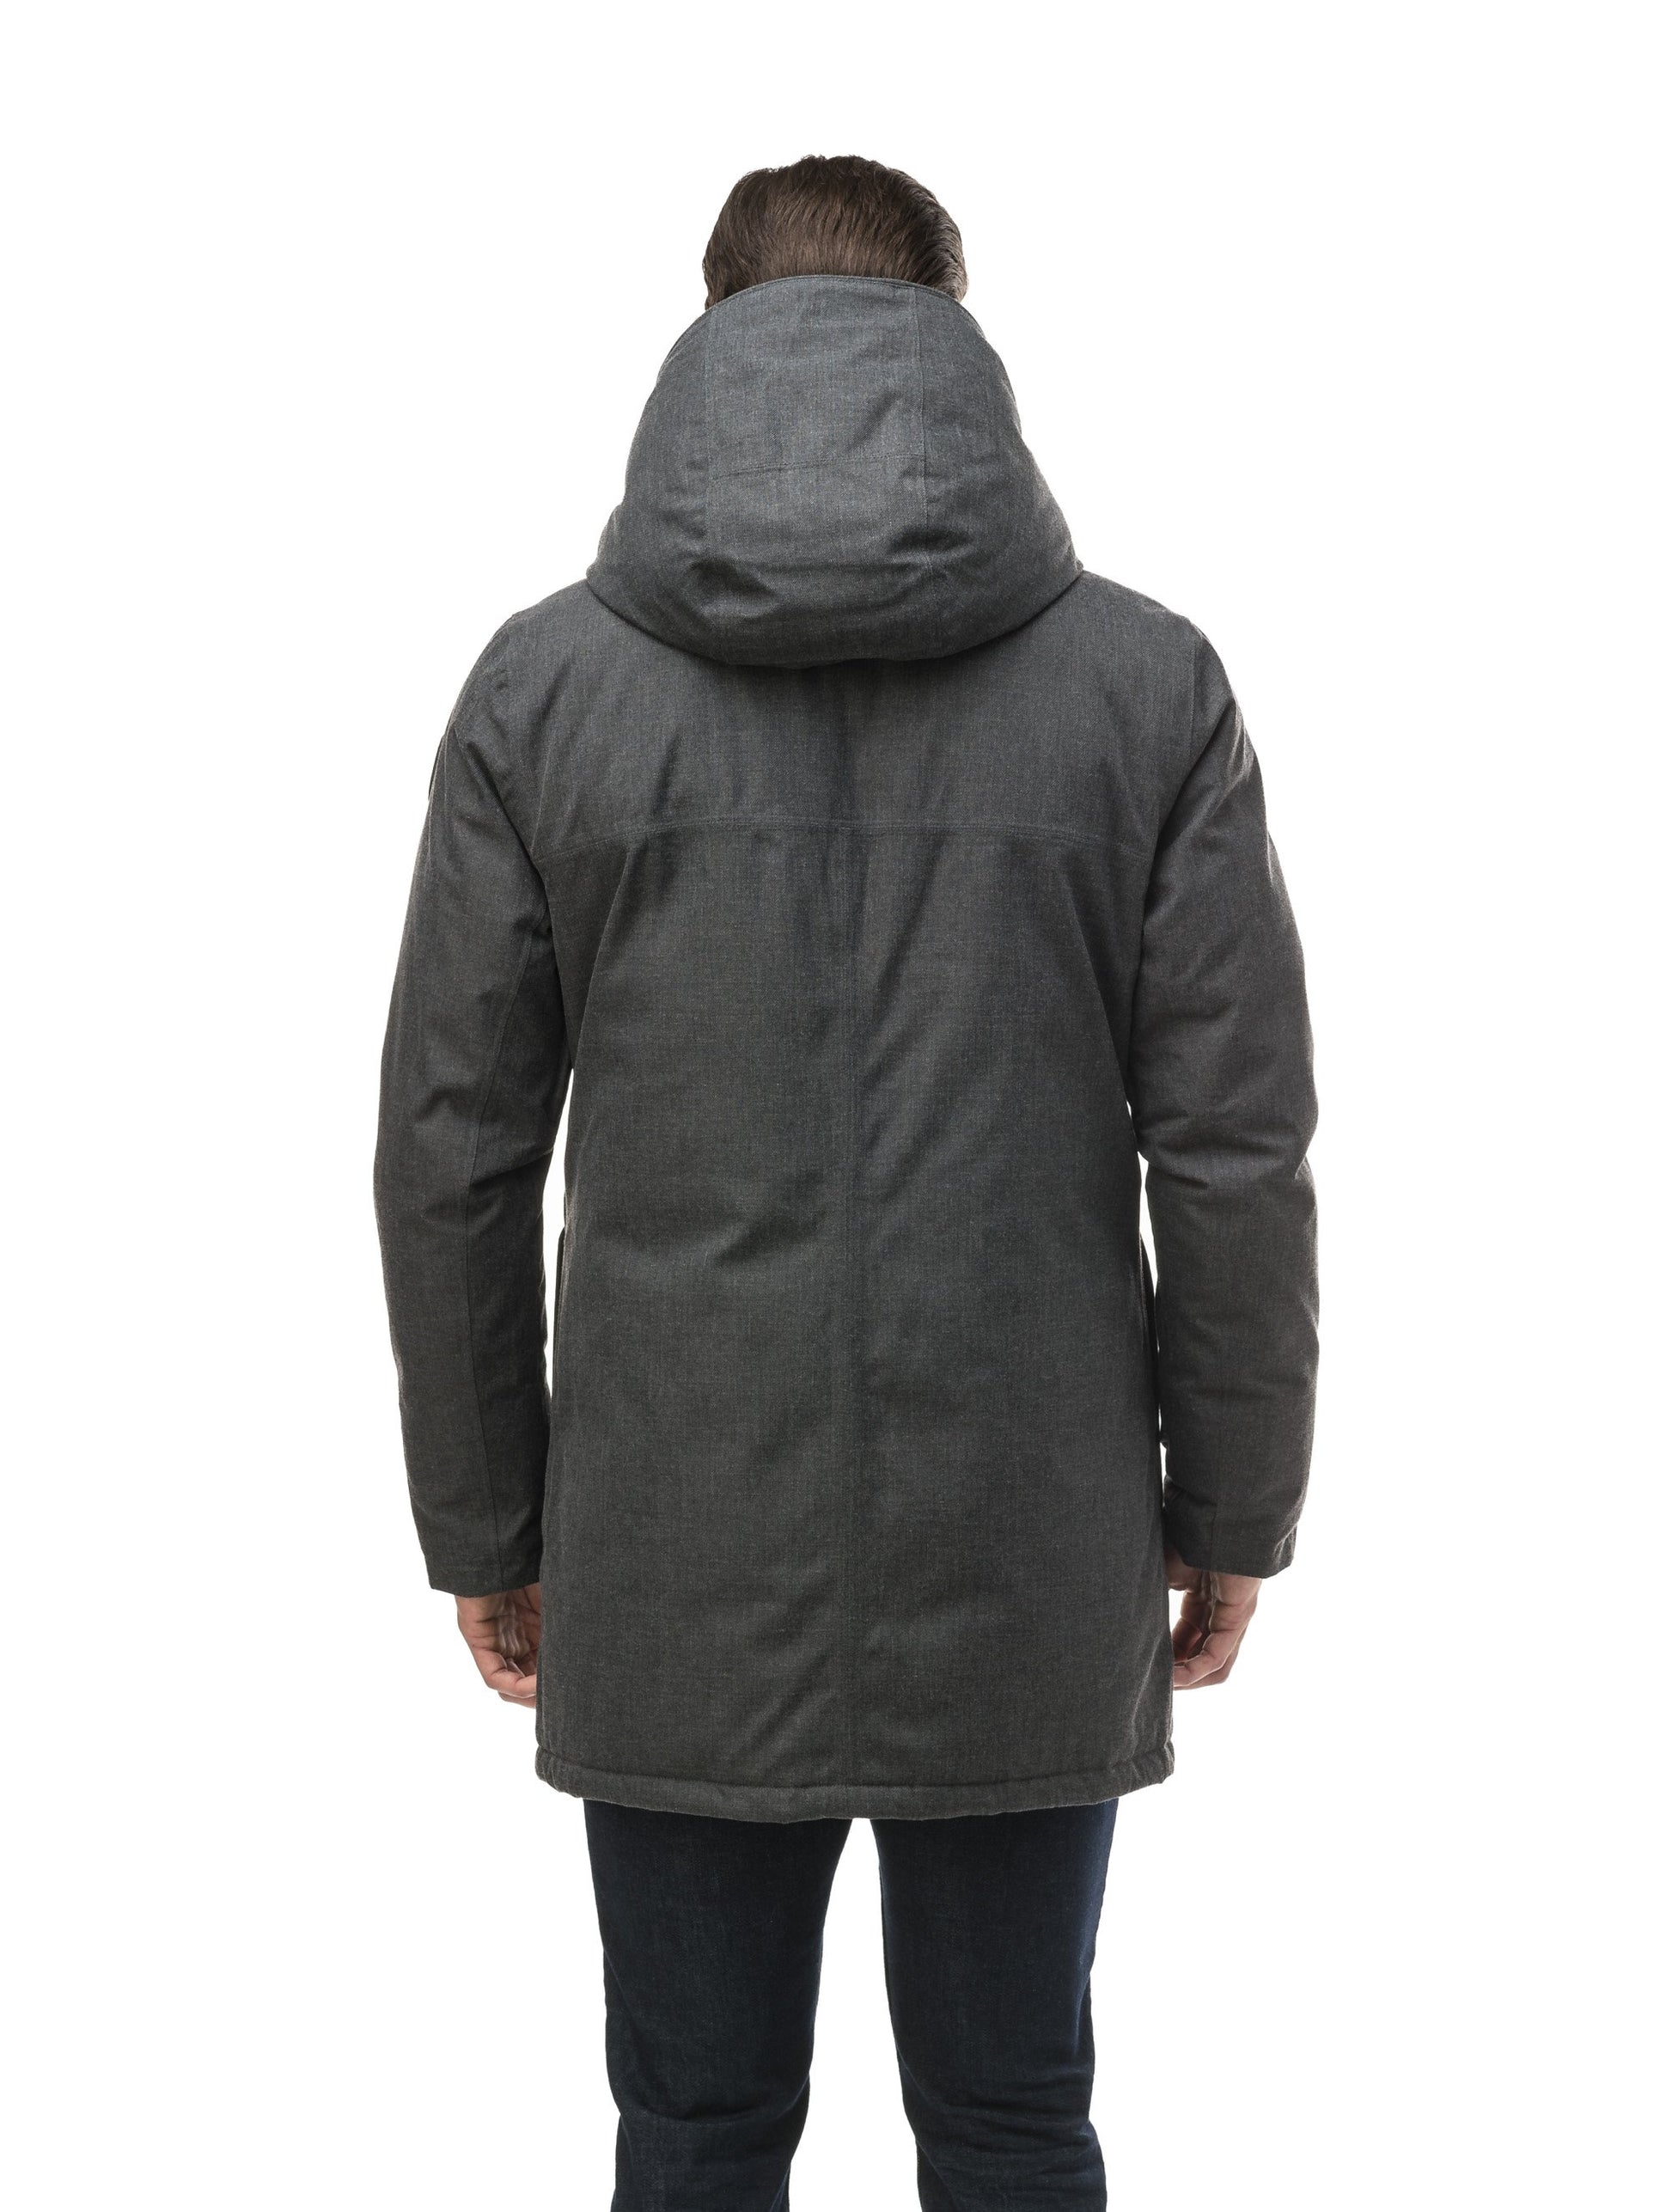 Men's fur free hooded parka with zipper and button closure placket featuring two oversized front pockets in H. Charcoal